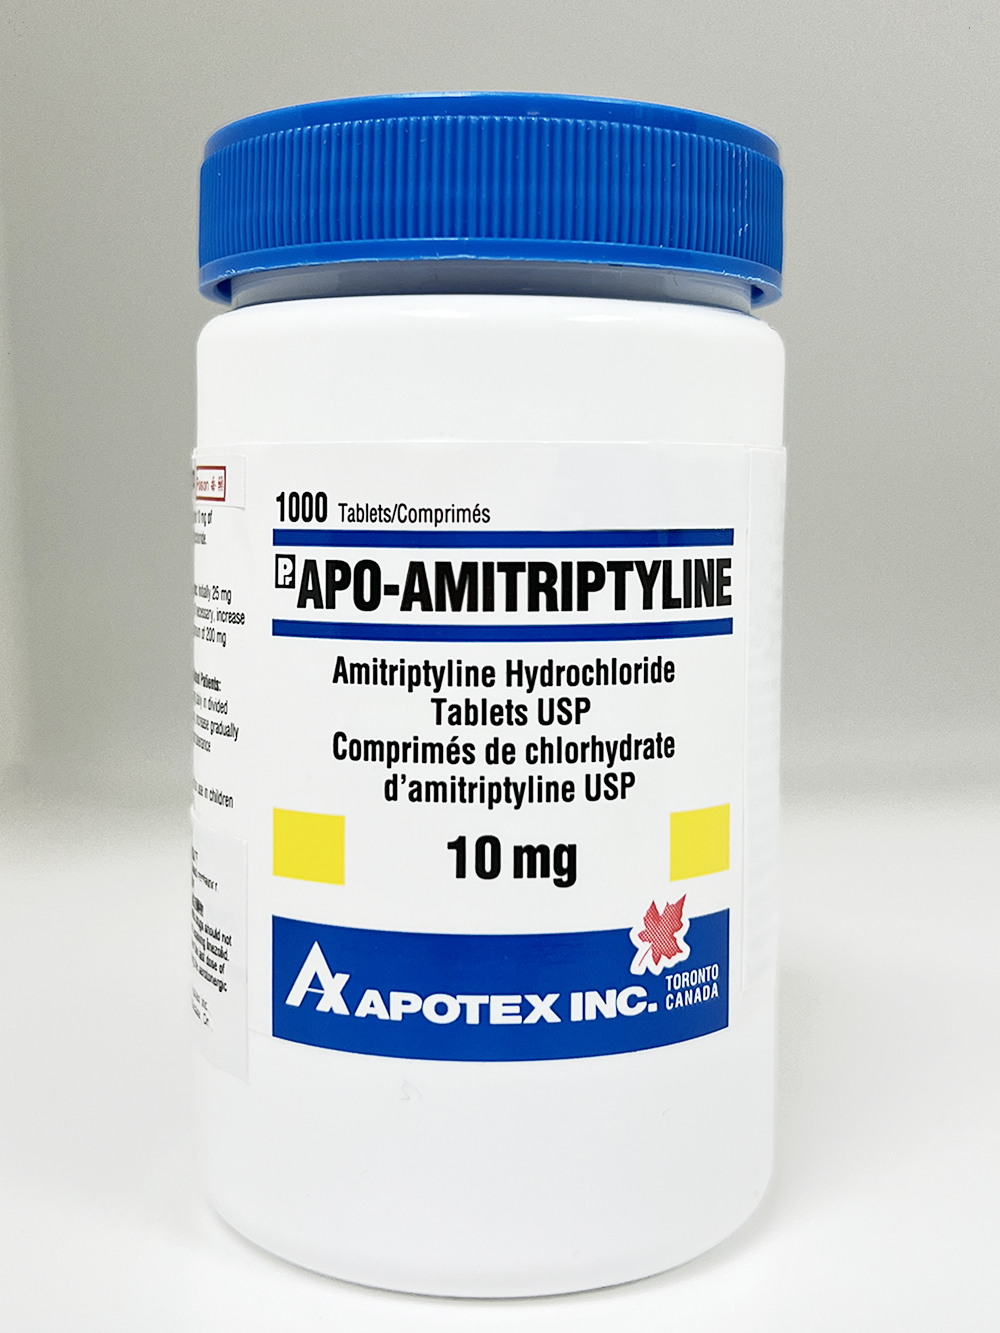 The Department of Health today (August 14) endorsed a licensed drug wholesaler, Hind Wing Co Ltd, to recall a total of four batches of four products from the market as a precautionary measure due to the presence of impurity in the products. Photo shows the Apo-amitriptyline tablets concerned.